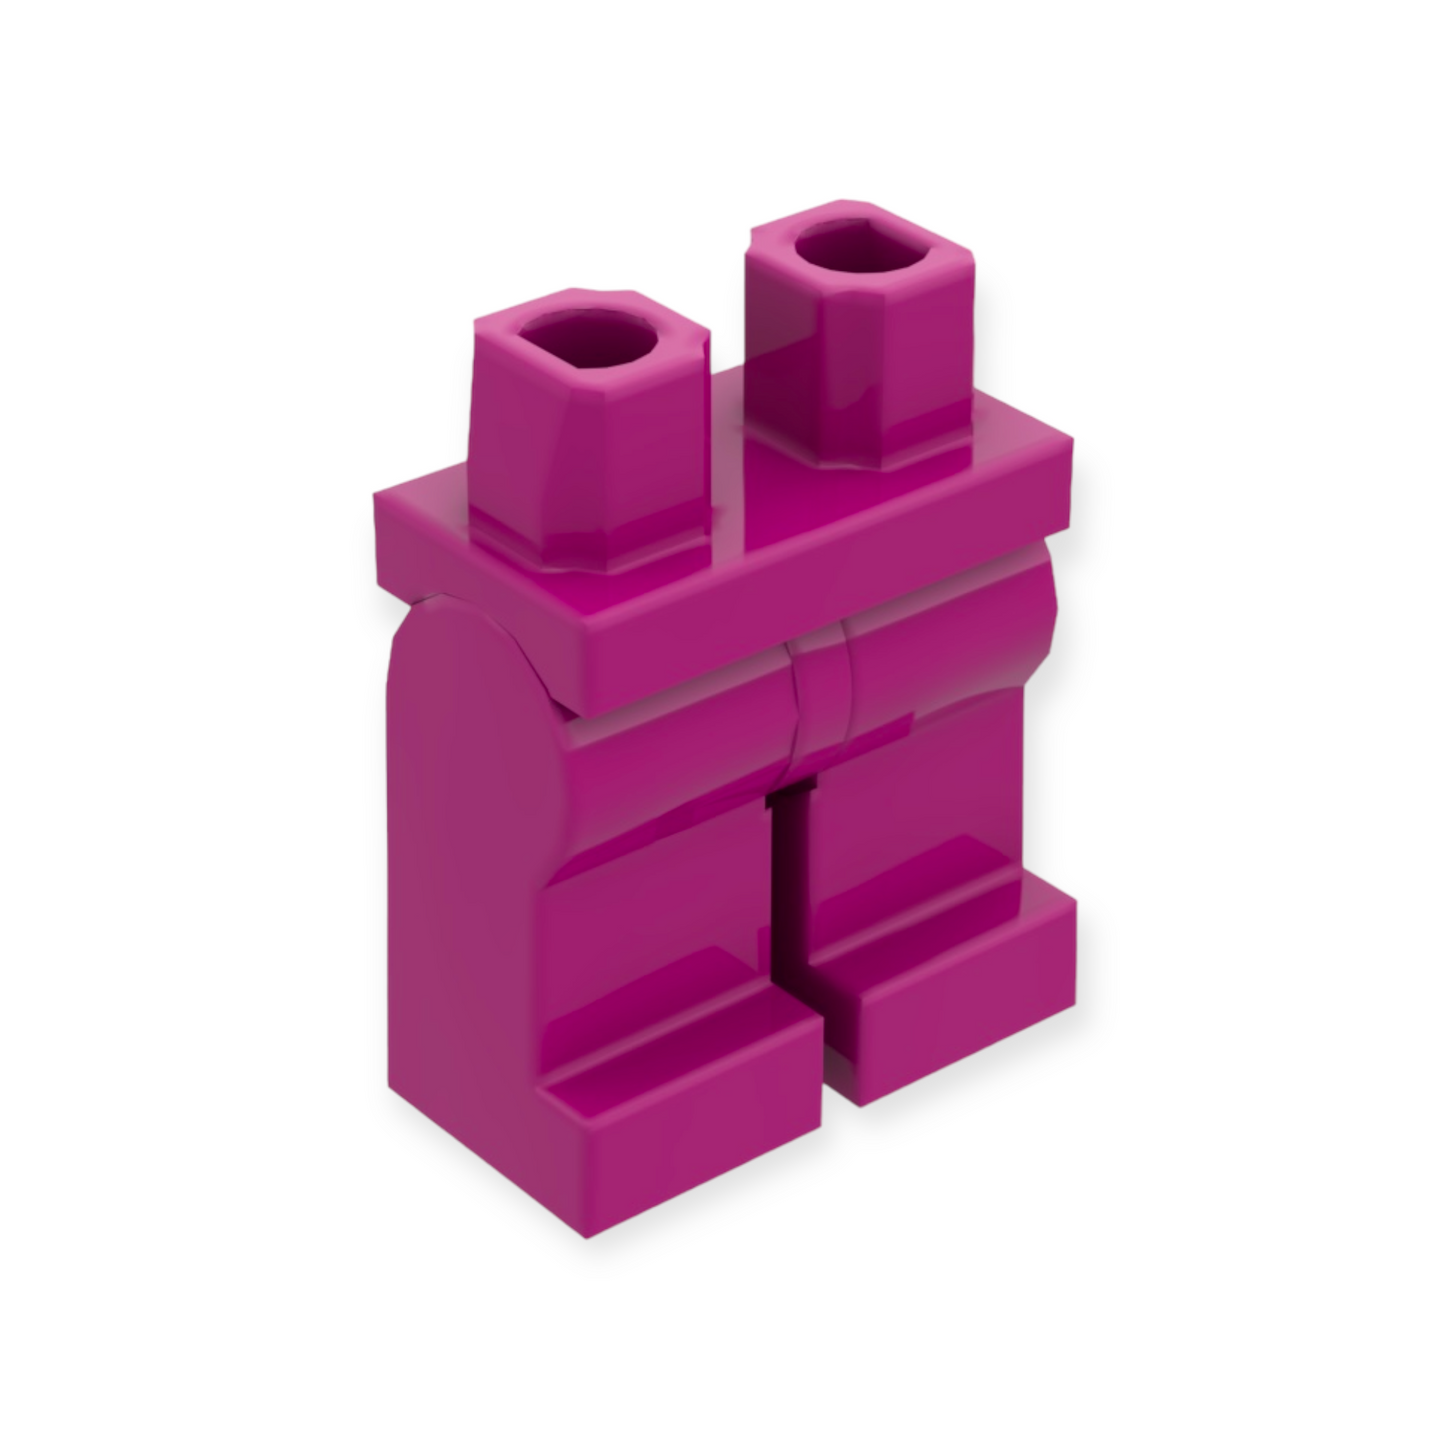 LEGO Hips and Legs - Magenta